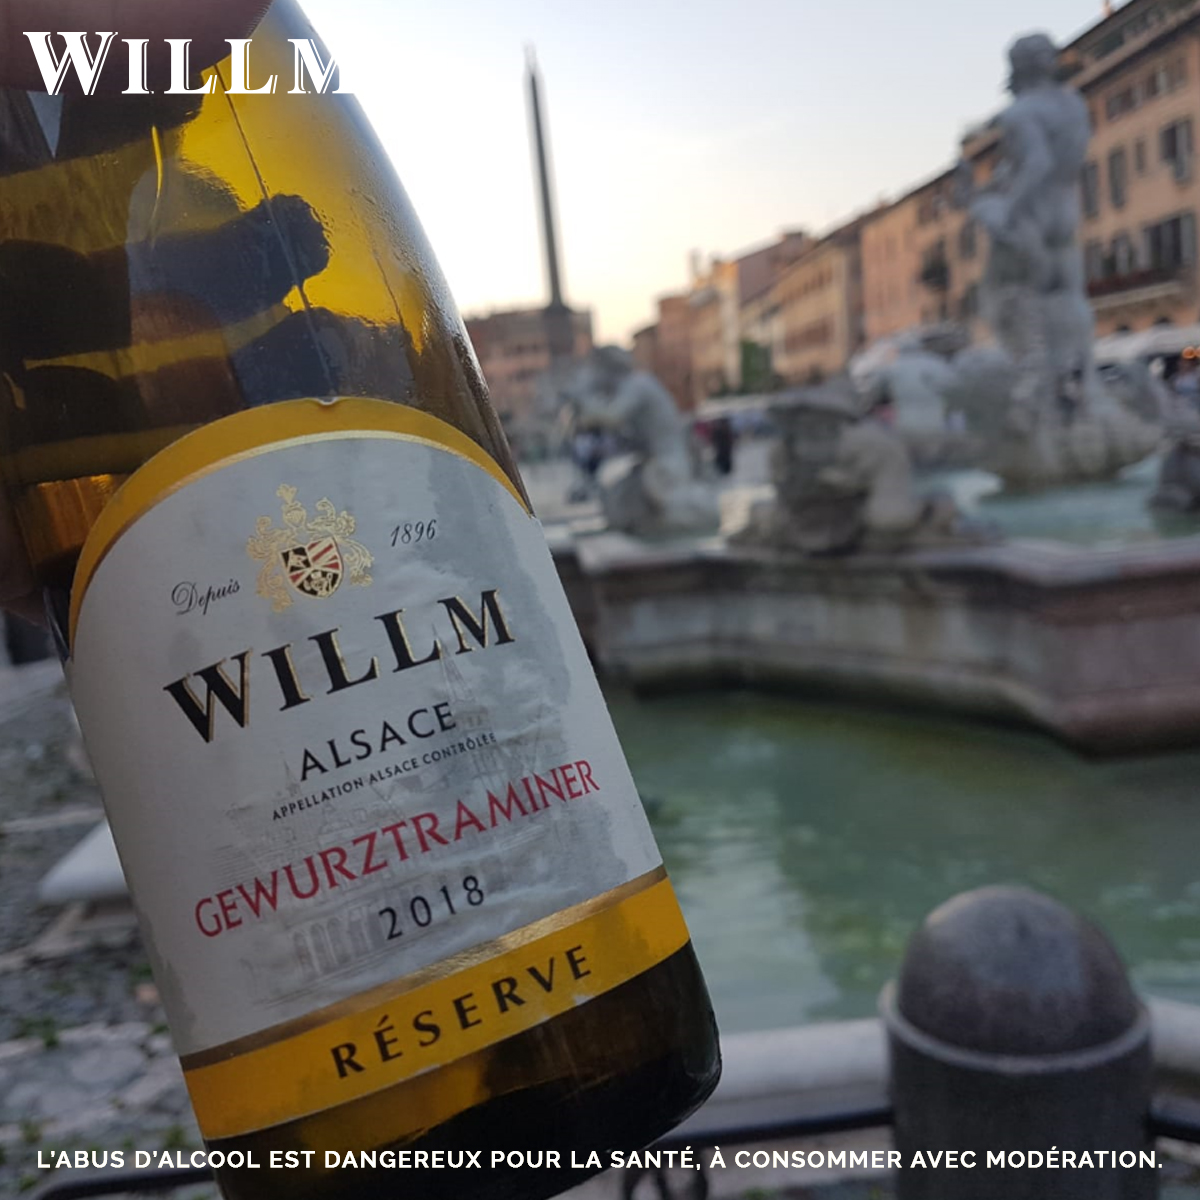 Today we are celebrating World #Italian Food Day! Our #Gewurztraminer Réserve can be enjoyed with a Risotto alla Milanese or a Caponata. Find our products all across Italy! 📷: @dimamarta_ #worlditalianfoodday #italy #alsacewine #drinkalsace #alsacerocks #alsacewillm